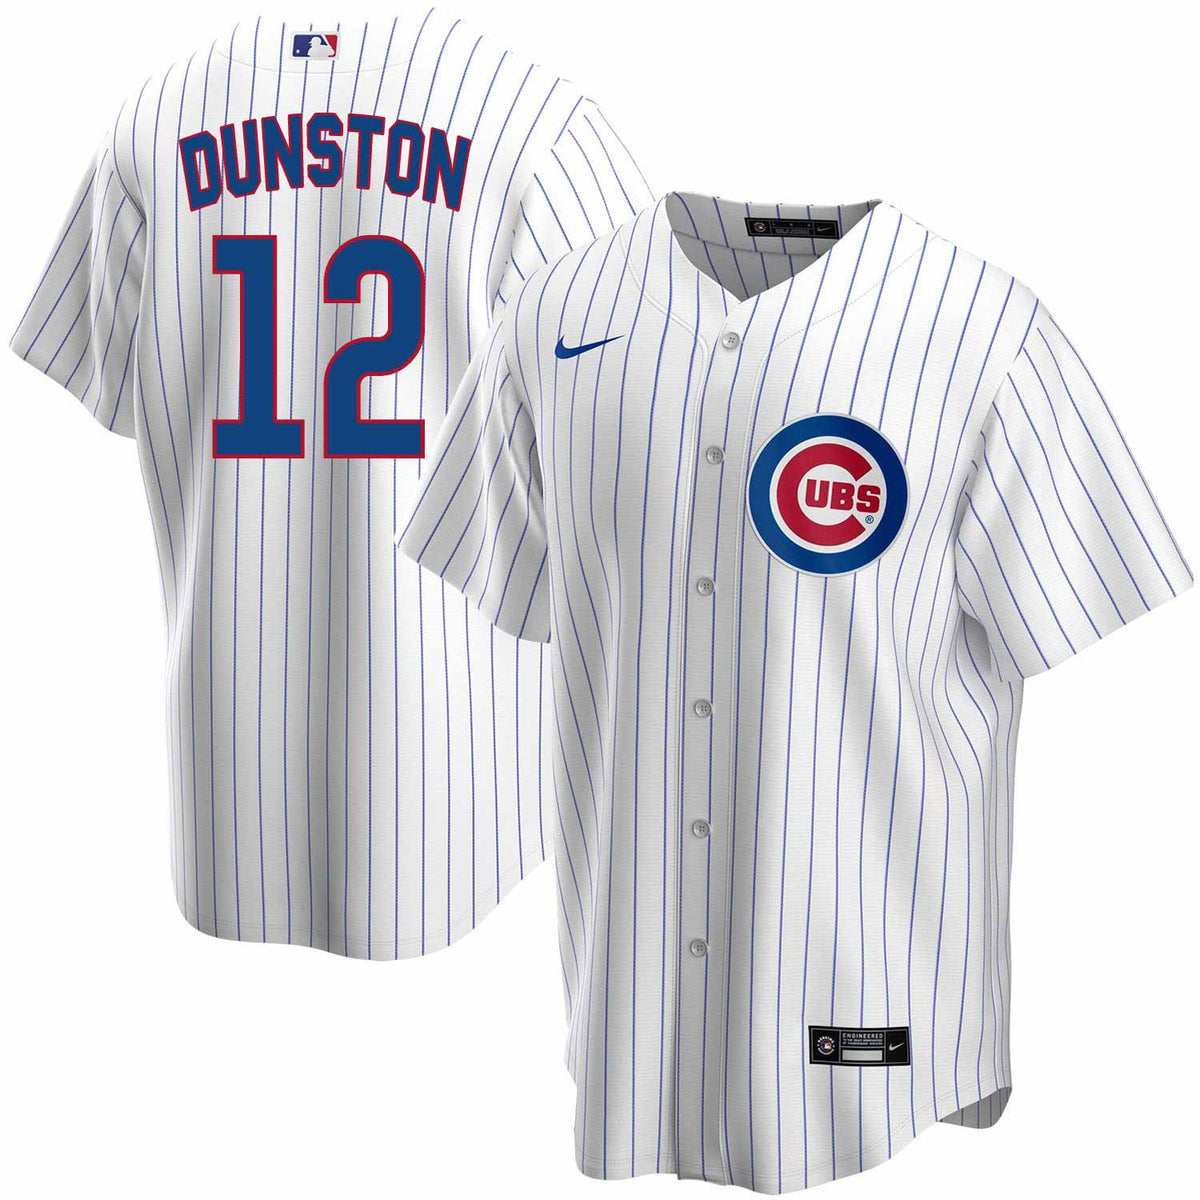 Sold at Auction: Shawon Dunston Game-Used 1987 Chicago Cubs Jersey